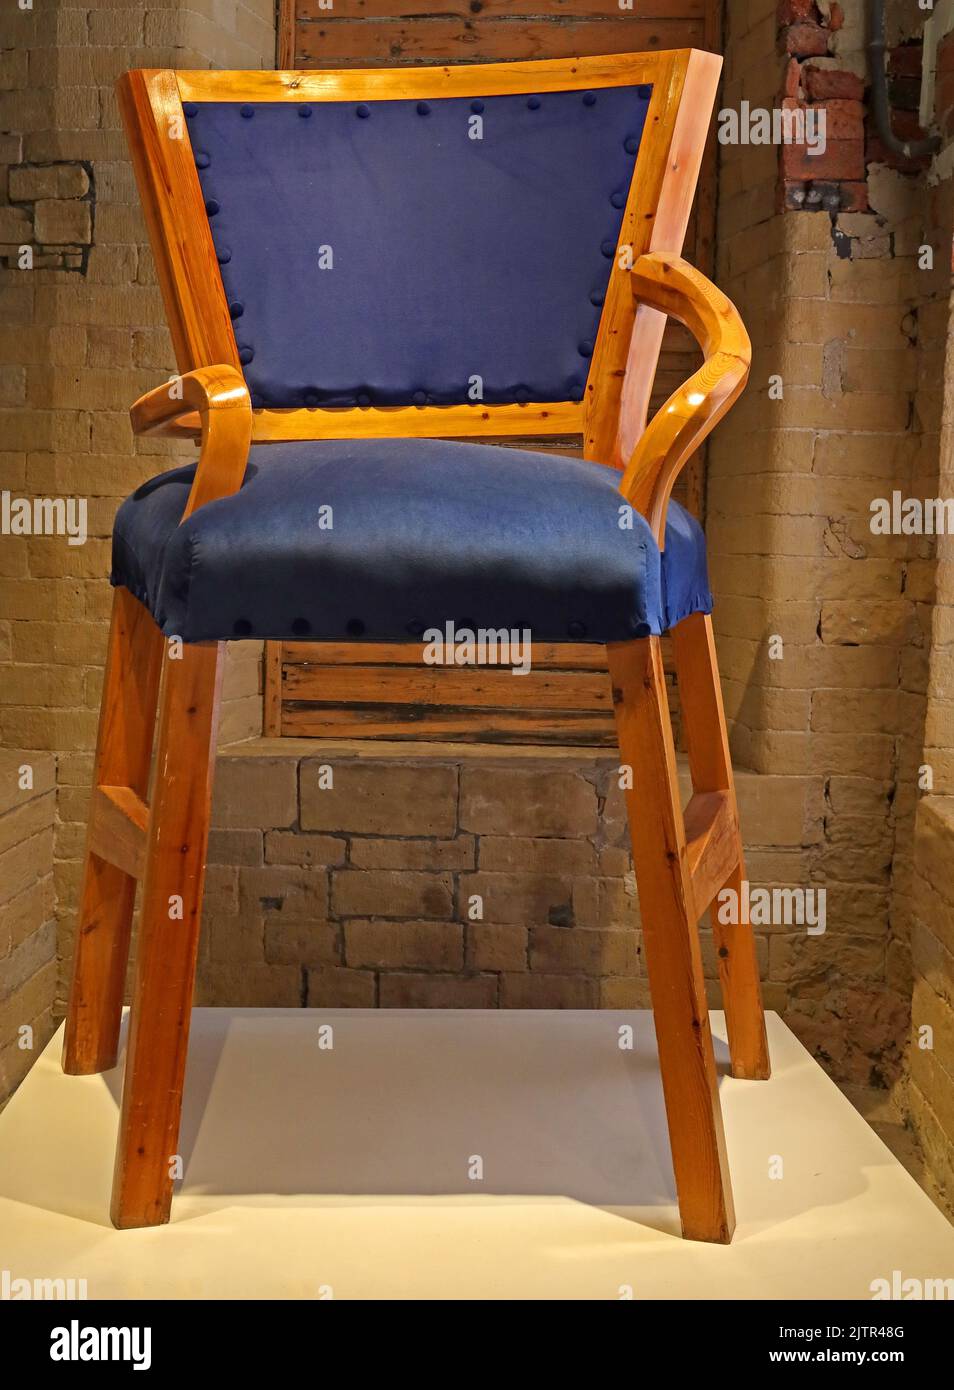 Hockneys oversized blue distorted chair,Salts Mill, Saltaire mill,tribute to 'The Chair' painting 1985 -striking subversion of traditional perspective Stock Photo